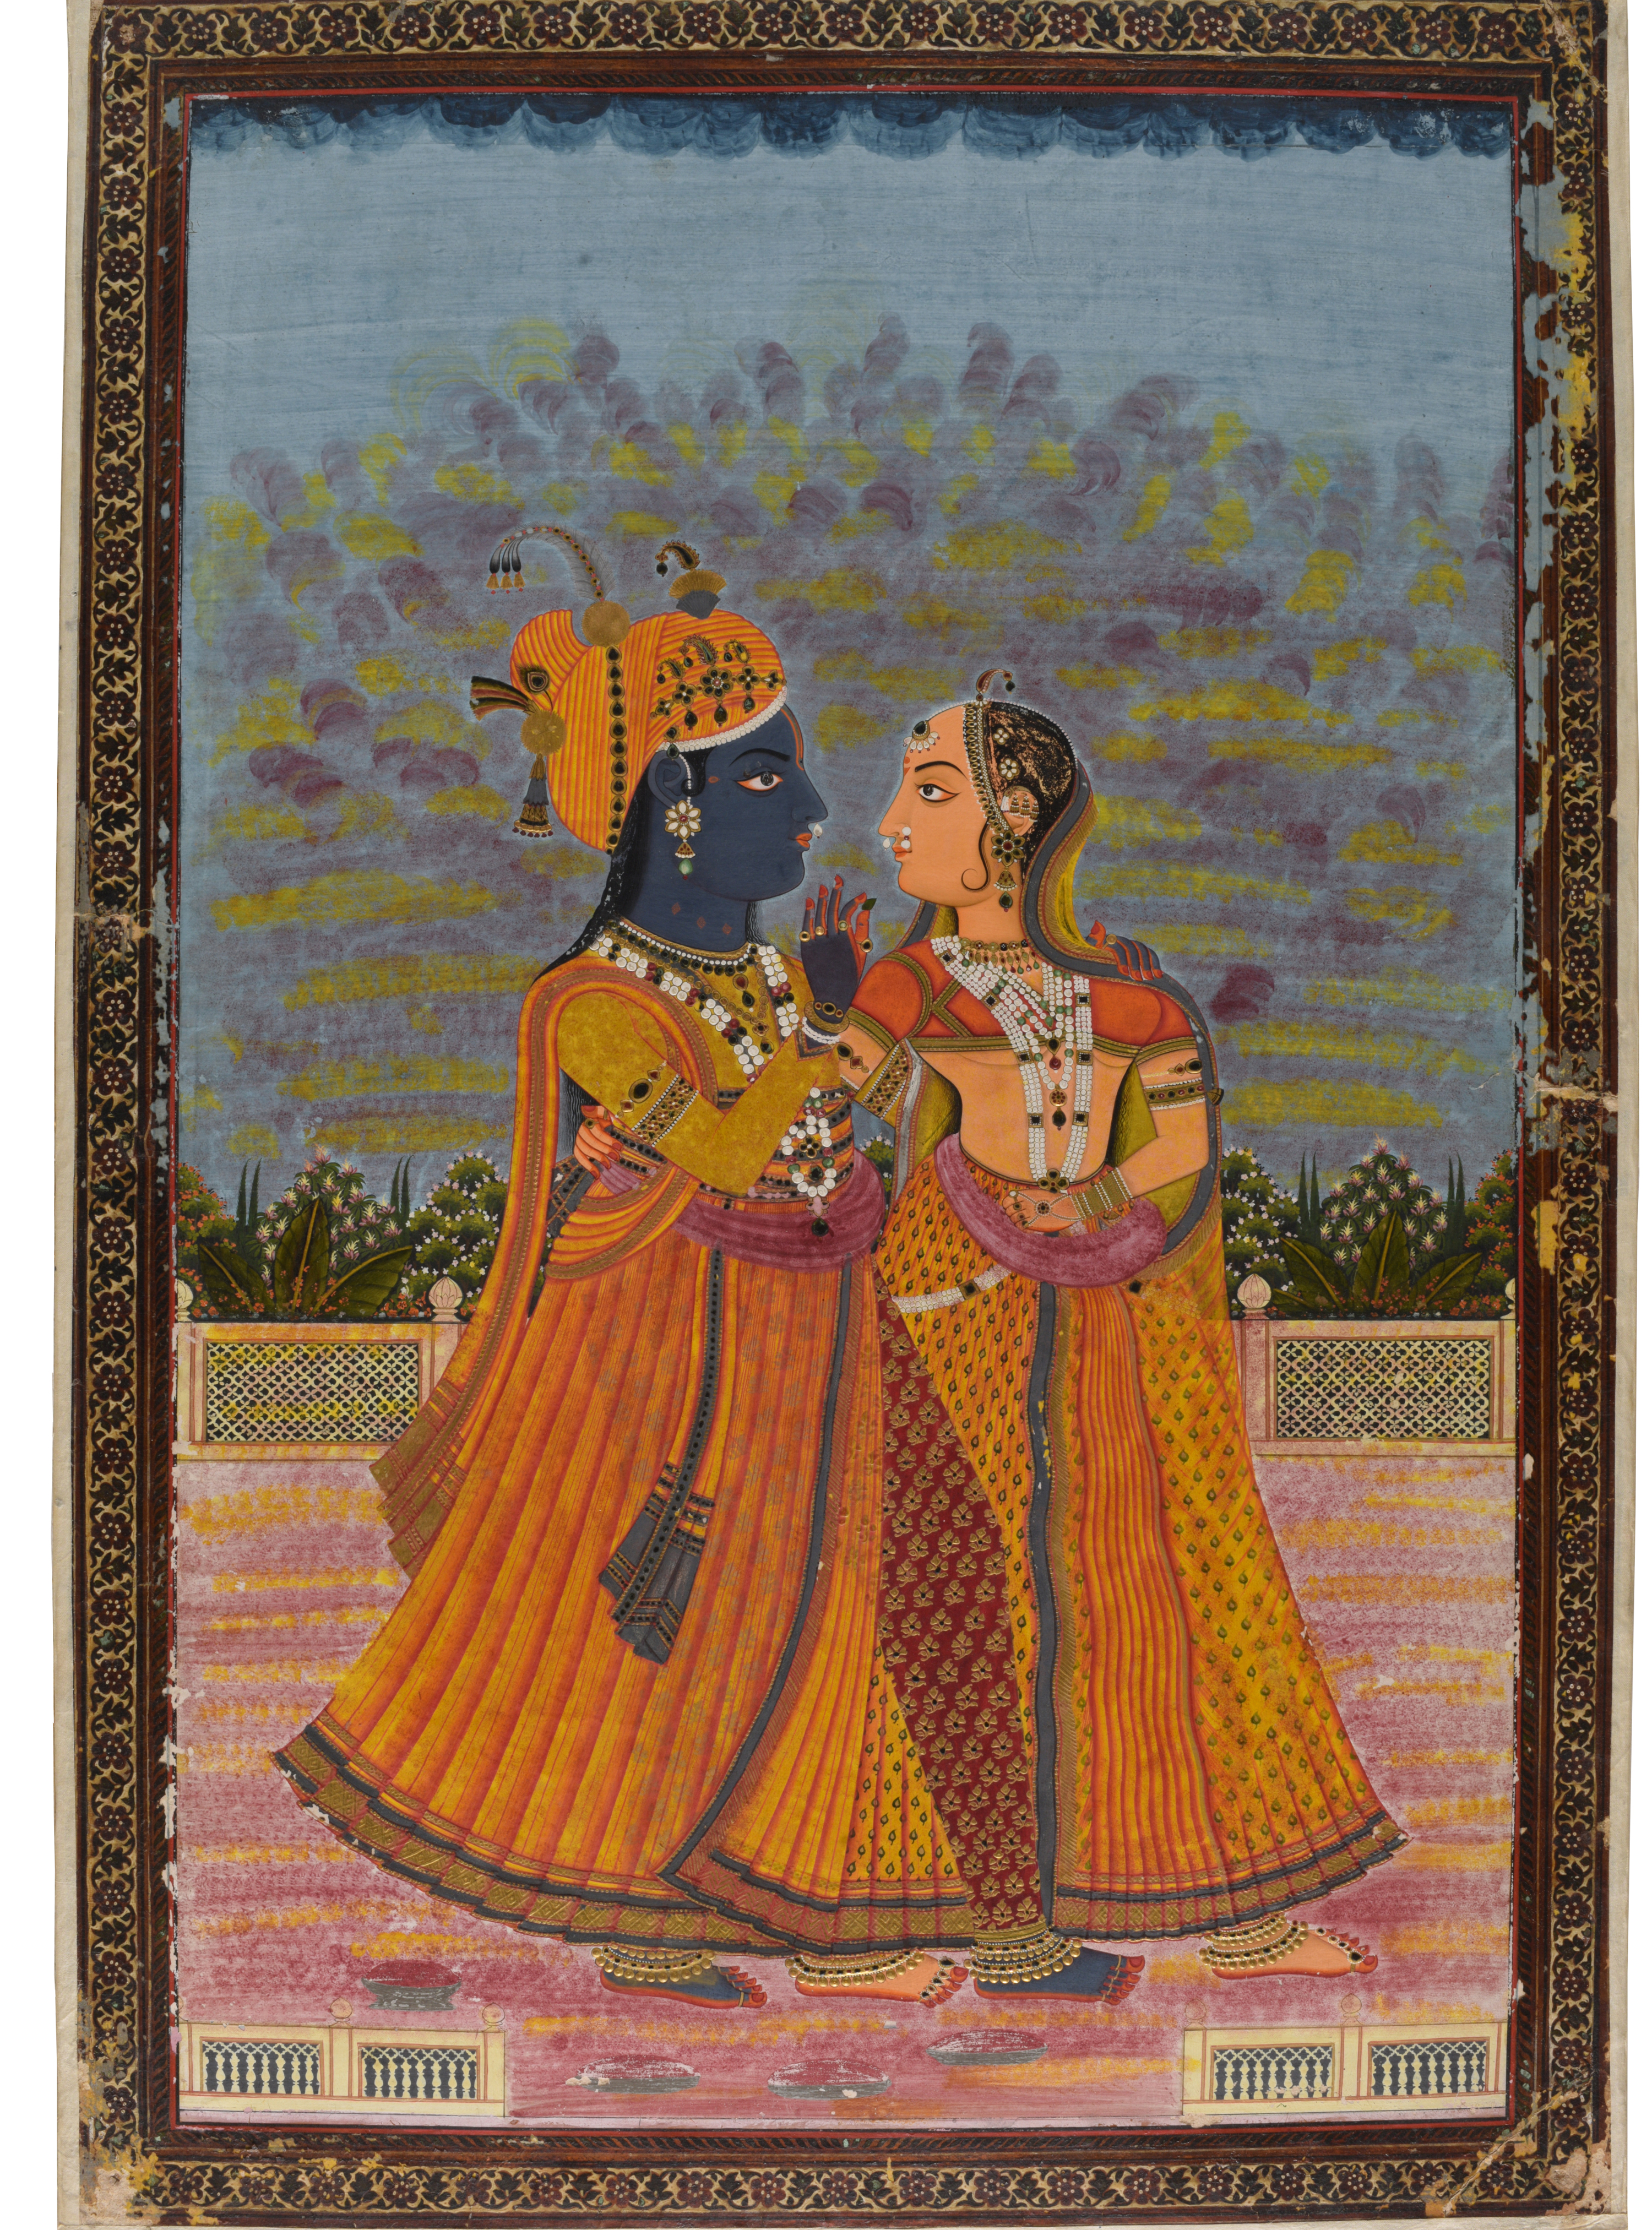 Radha and Krishna by Unknown Artist - ca.1750 - 67 x 46 cm National Museum of New Delhi, India